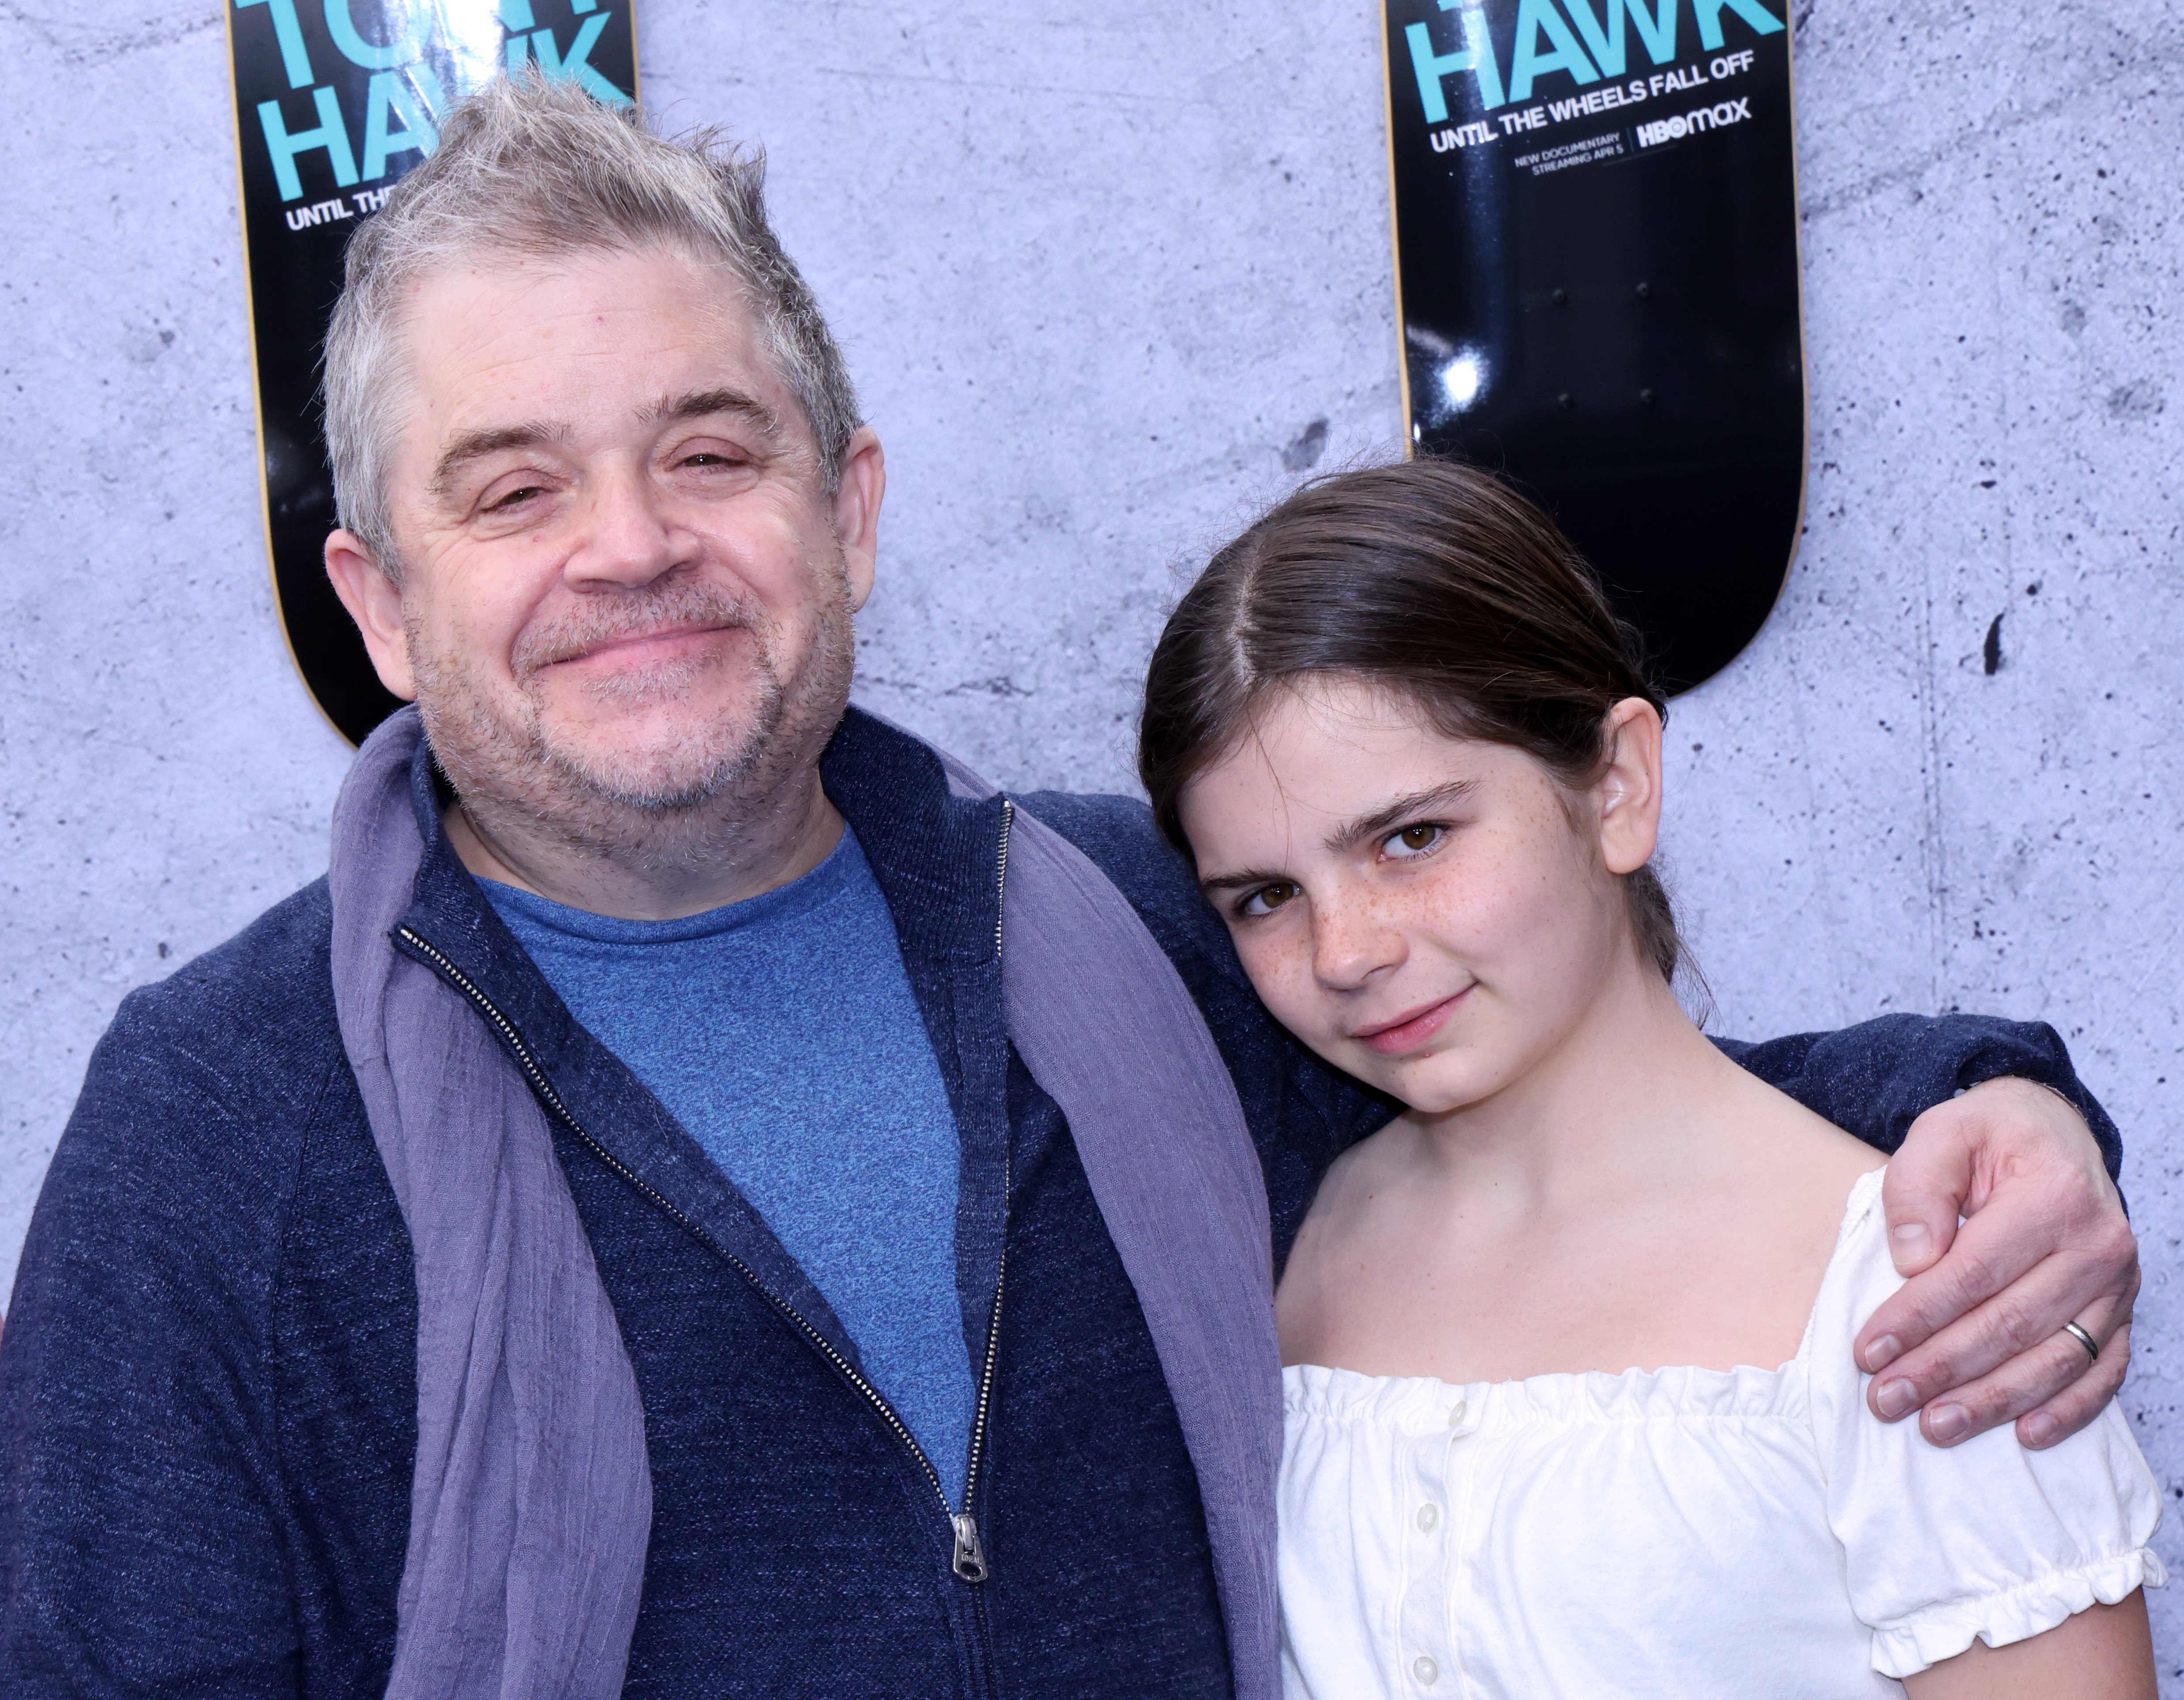 Patton Oswalt and Alice Rigney Oswalt at the Los Angeles premiere of HBO Max's "Tony Hawk: Until The Wheels Fall Off" in March 2022 in Santa Monica, California. | Source: Getty Images